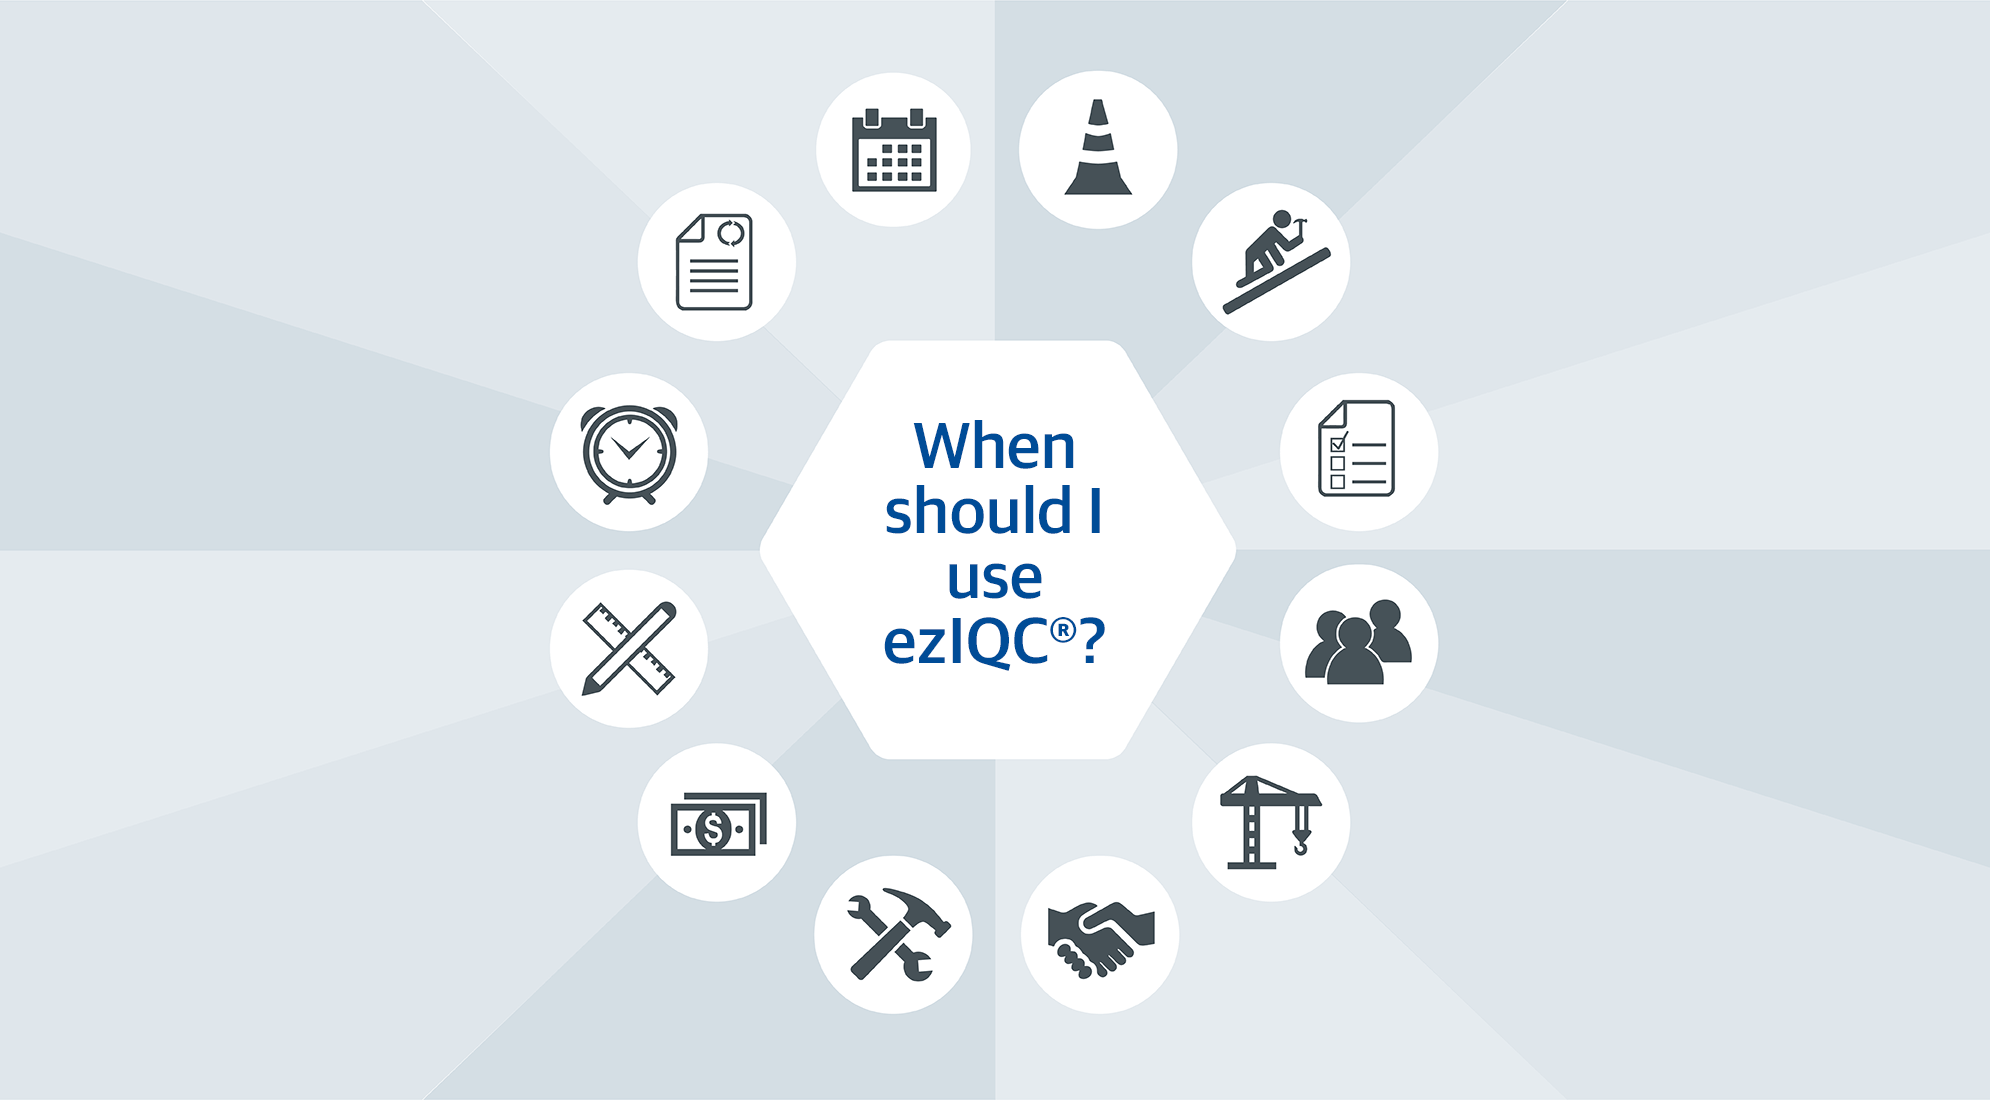 When to Use ezIQC®